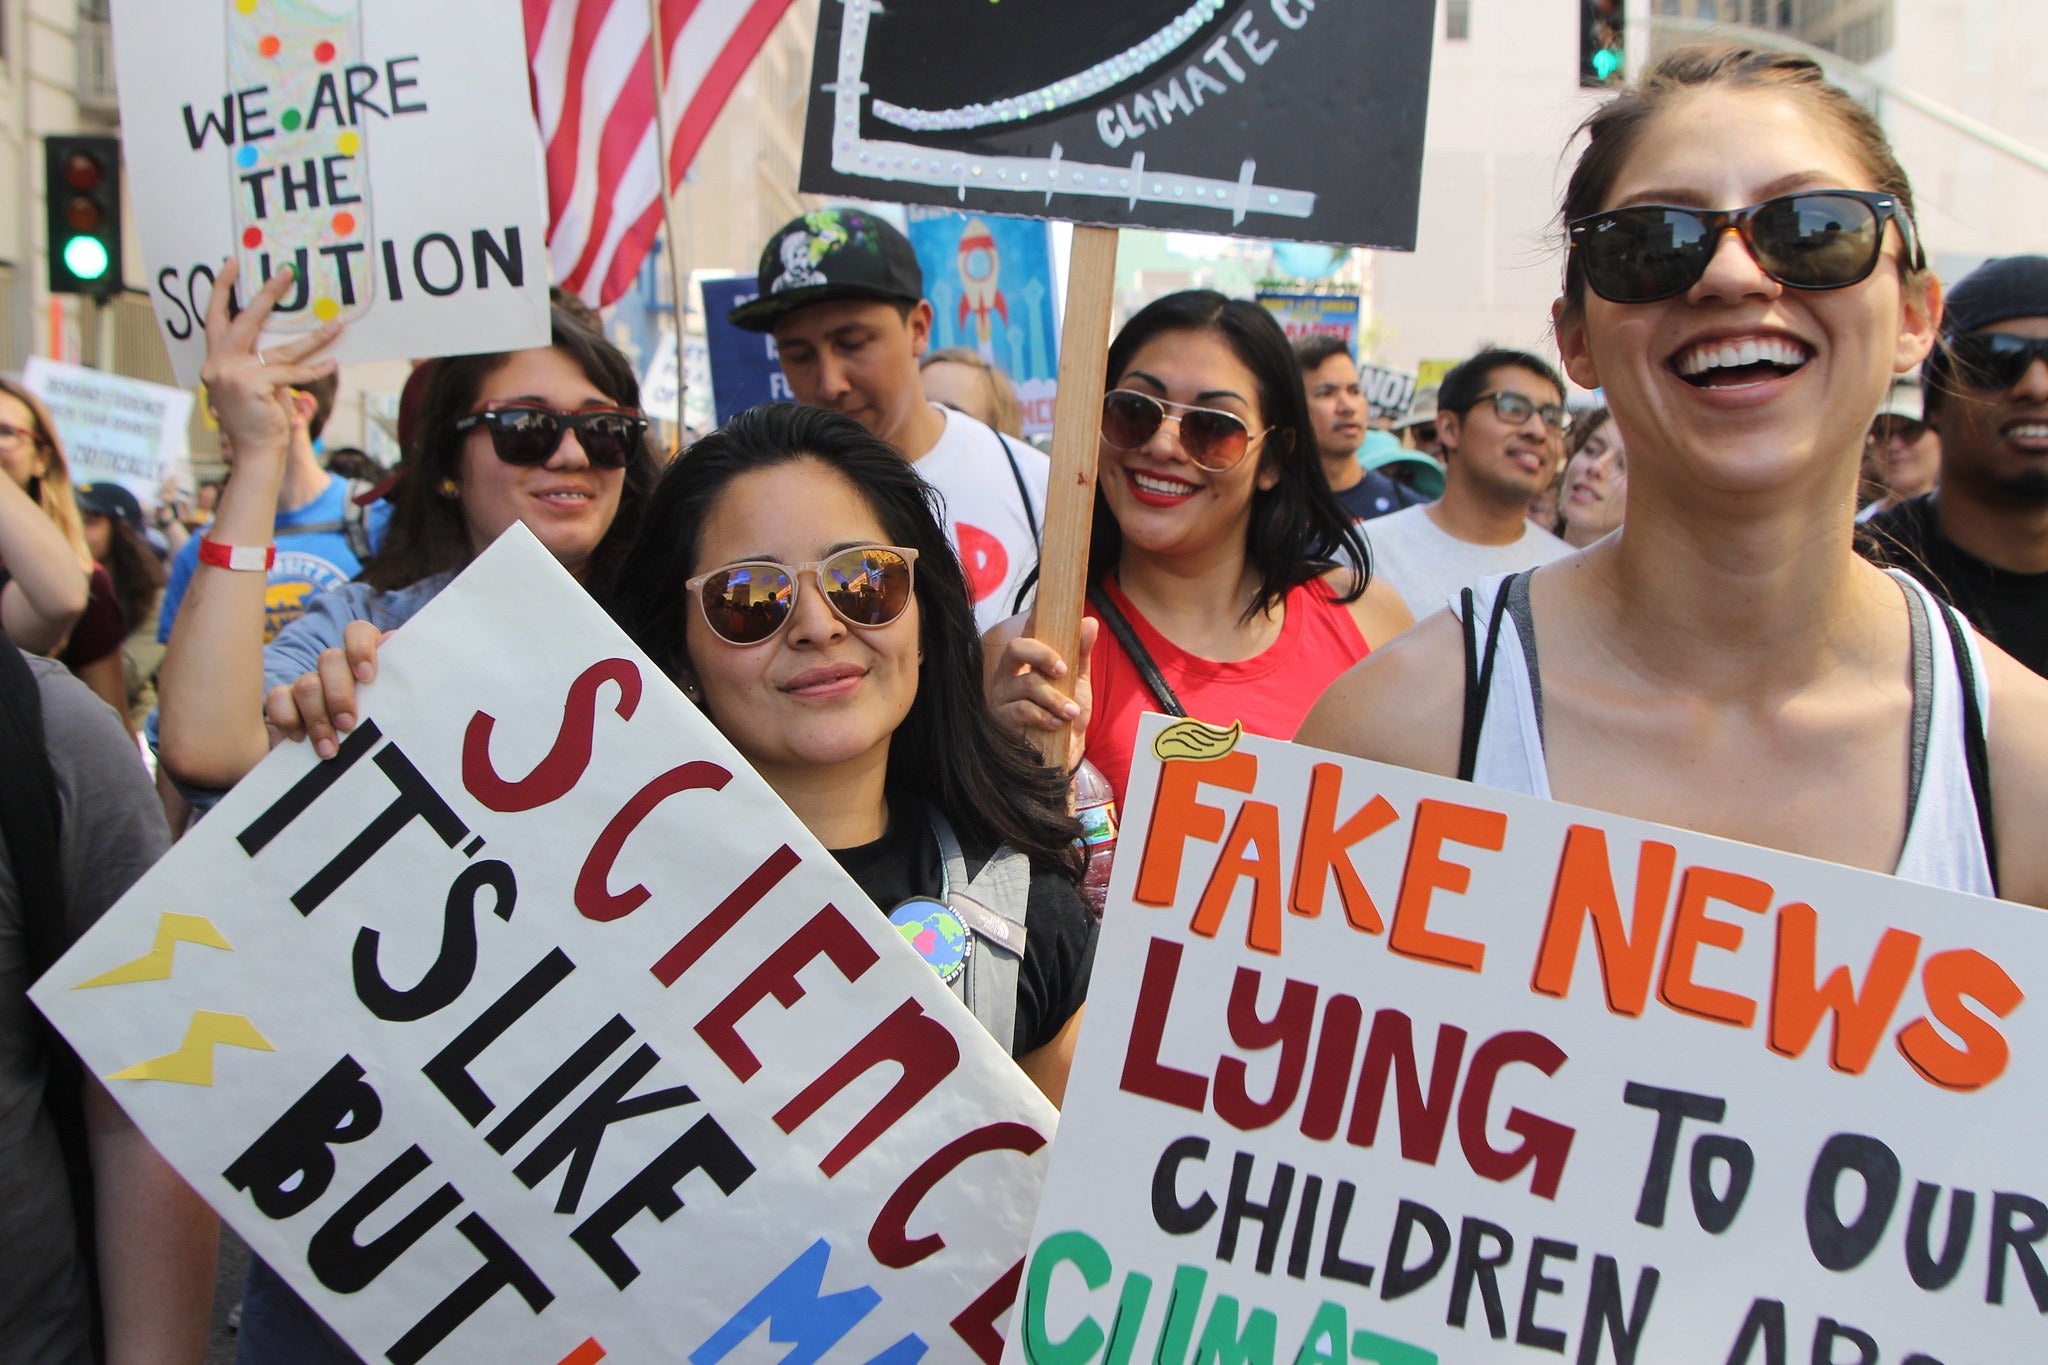 BUILD PODER students marched in Downtown Los Angeles at the March for Science on April 22, 2017.